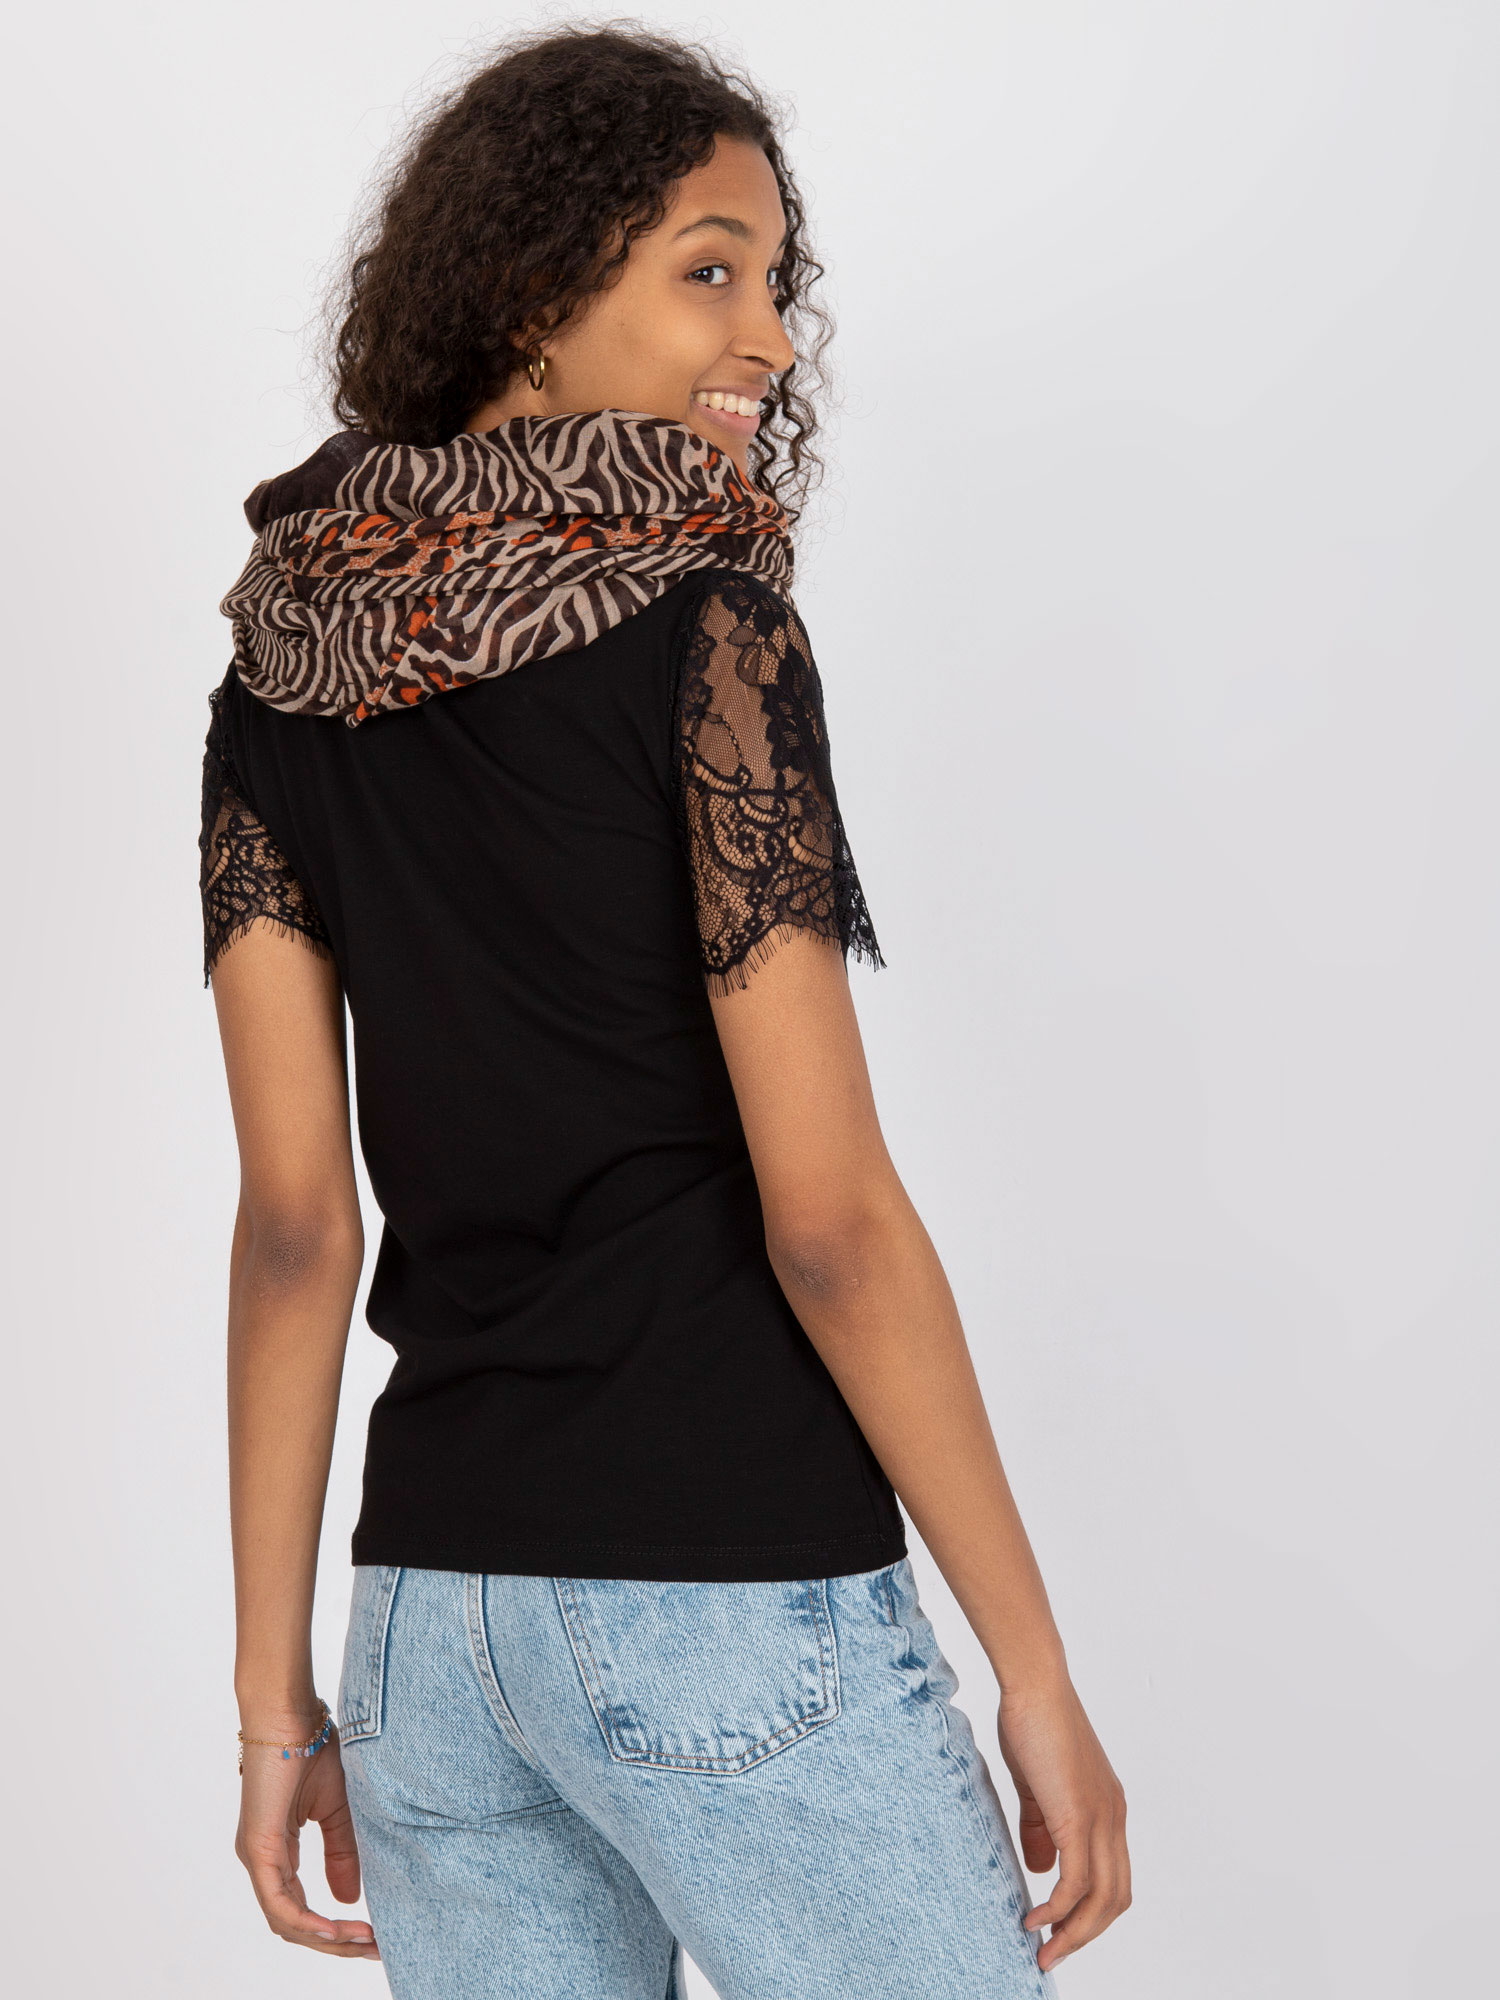 Brown and beige scarf with print